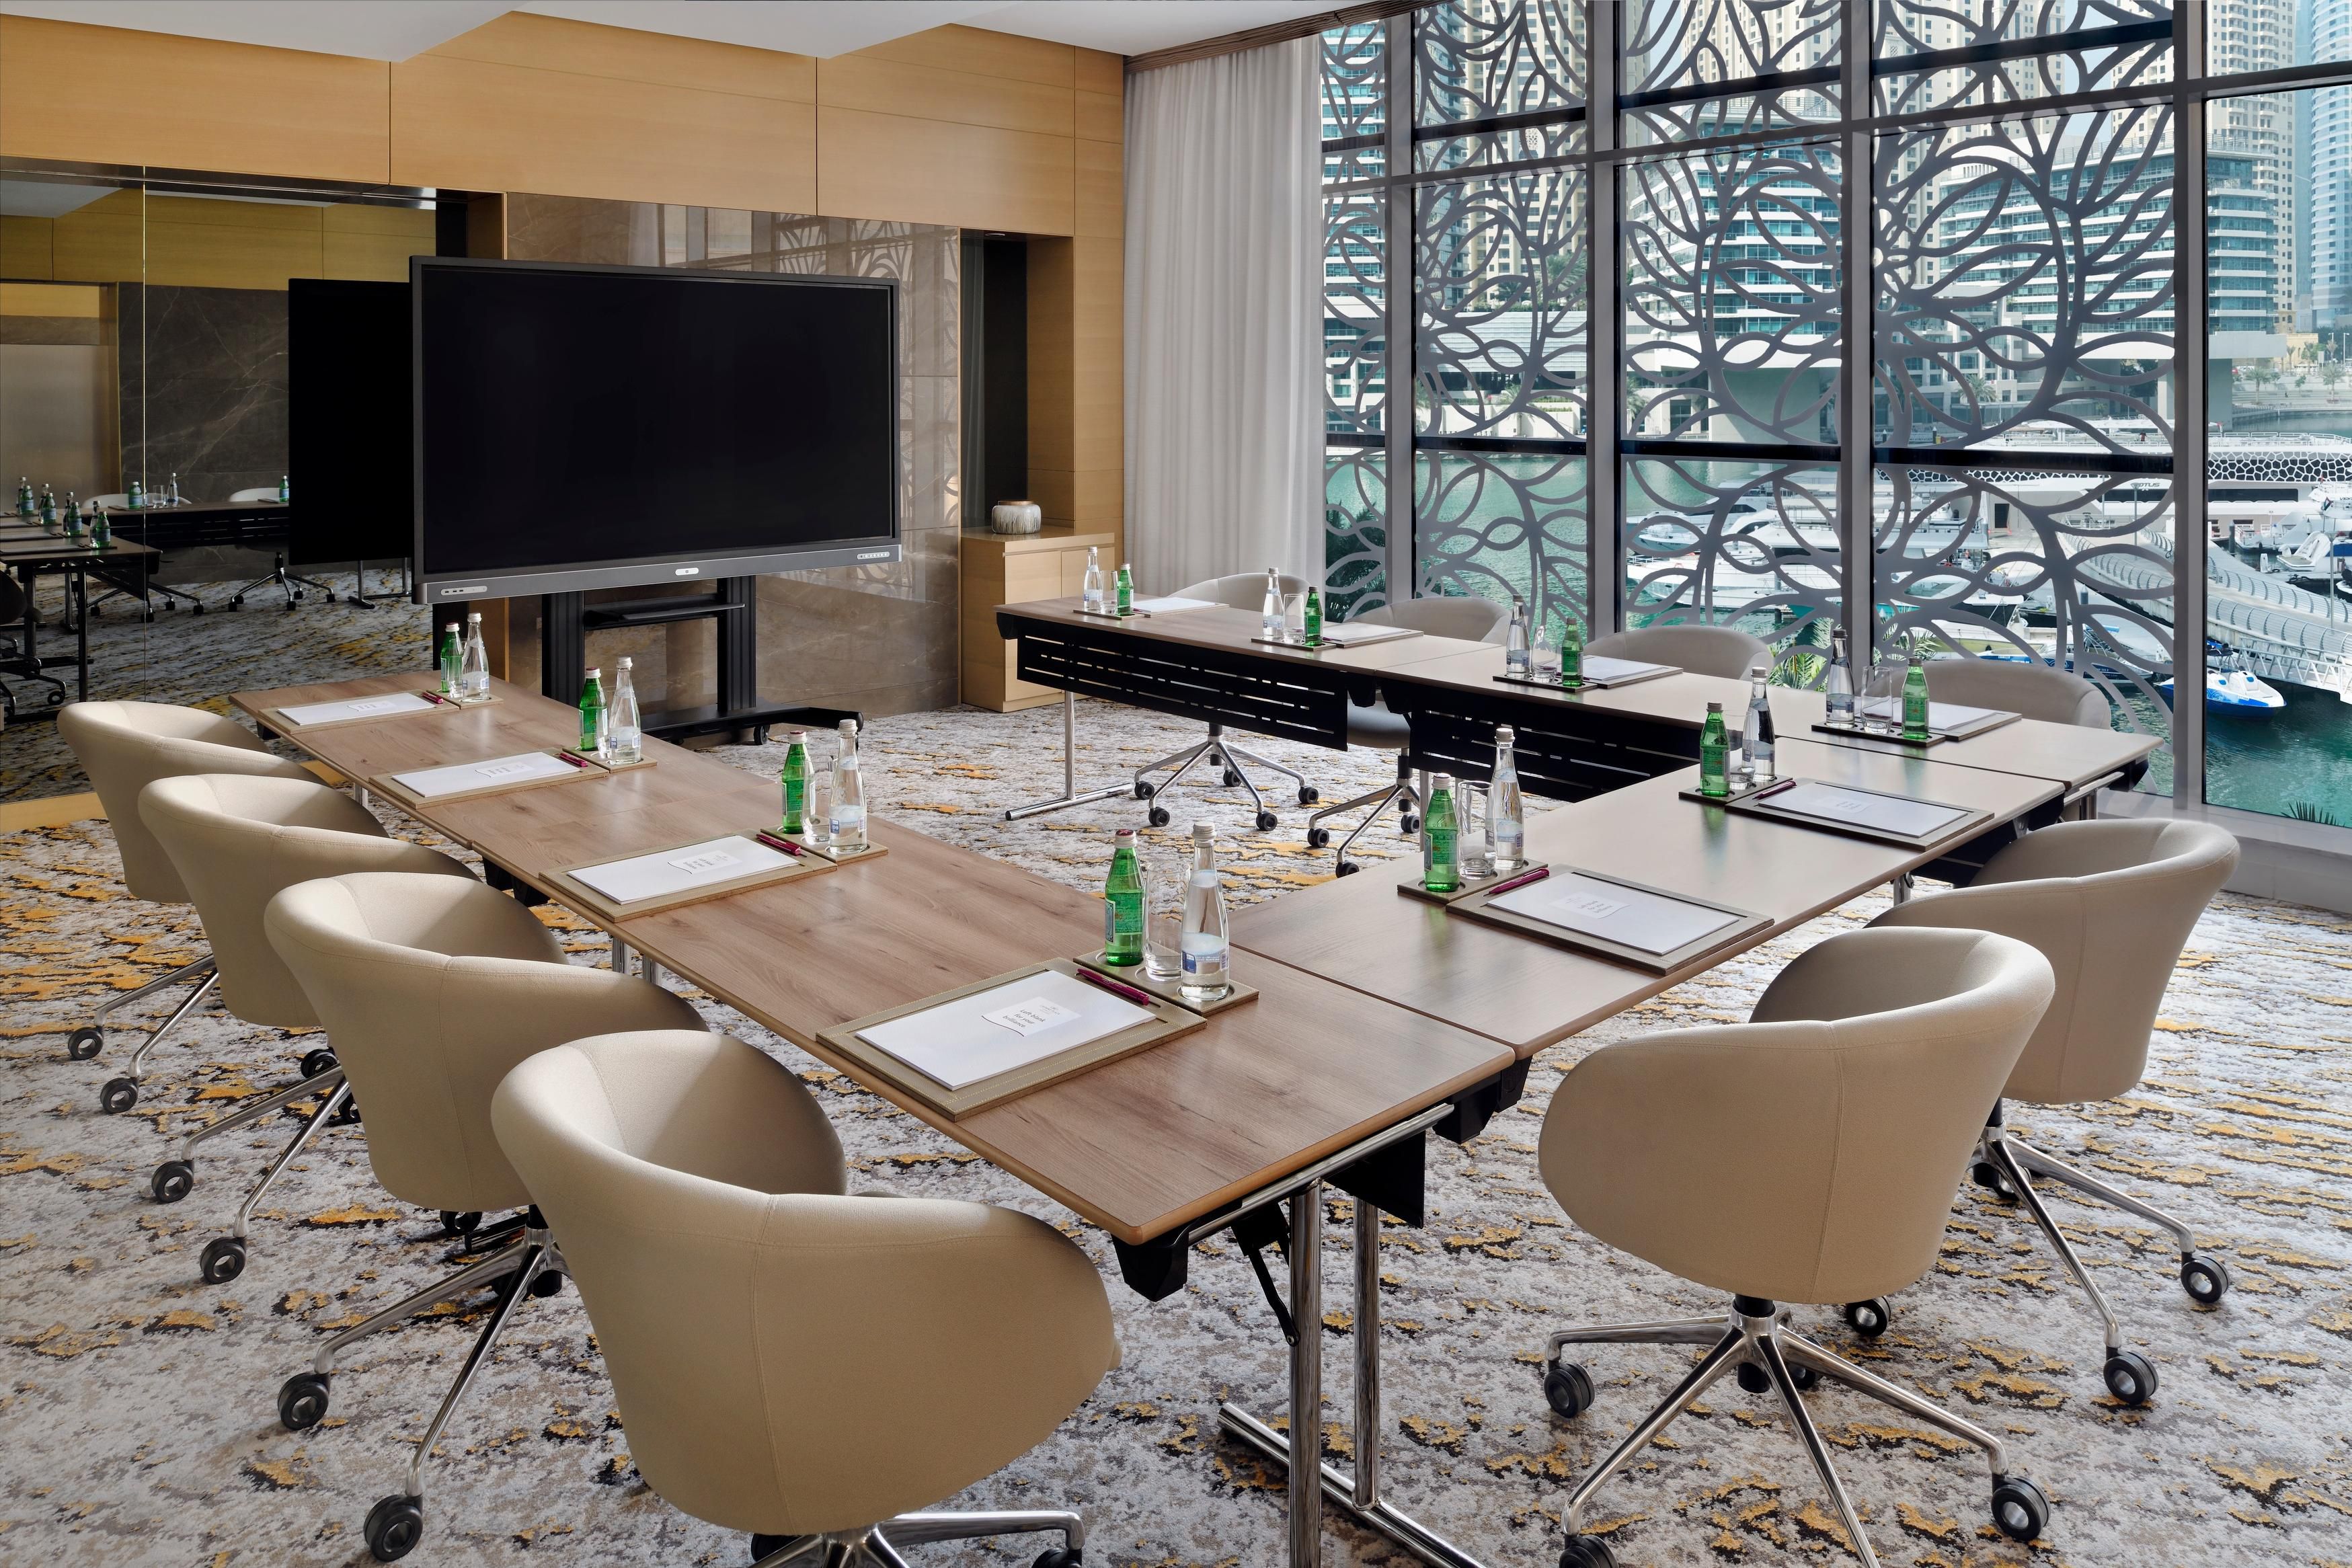 Crowne Plaza Dubai Marina is an exceptional location for meetings